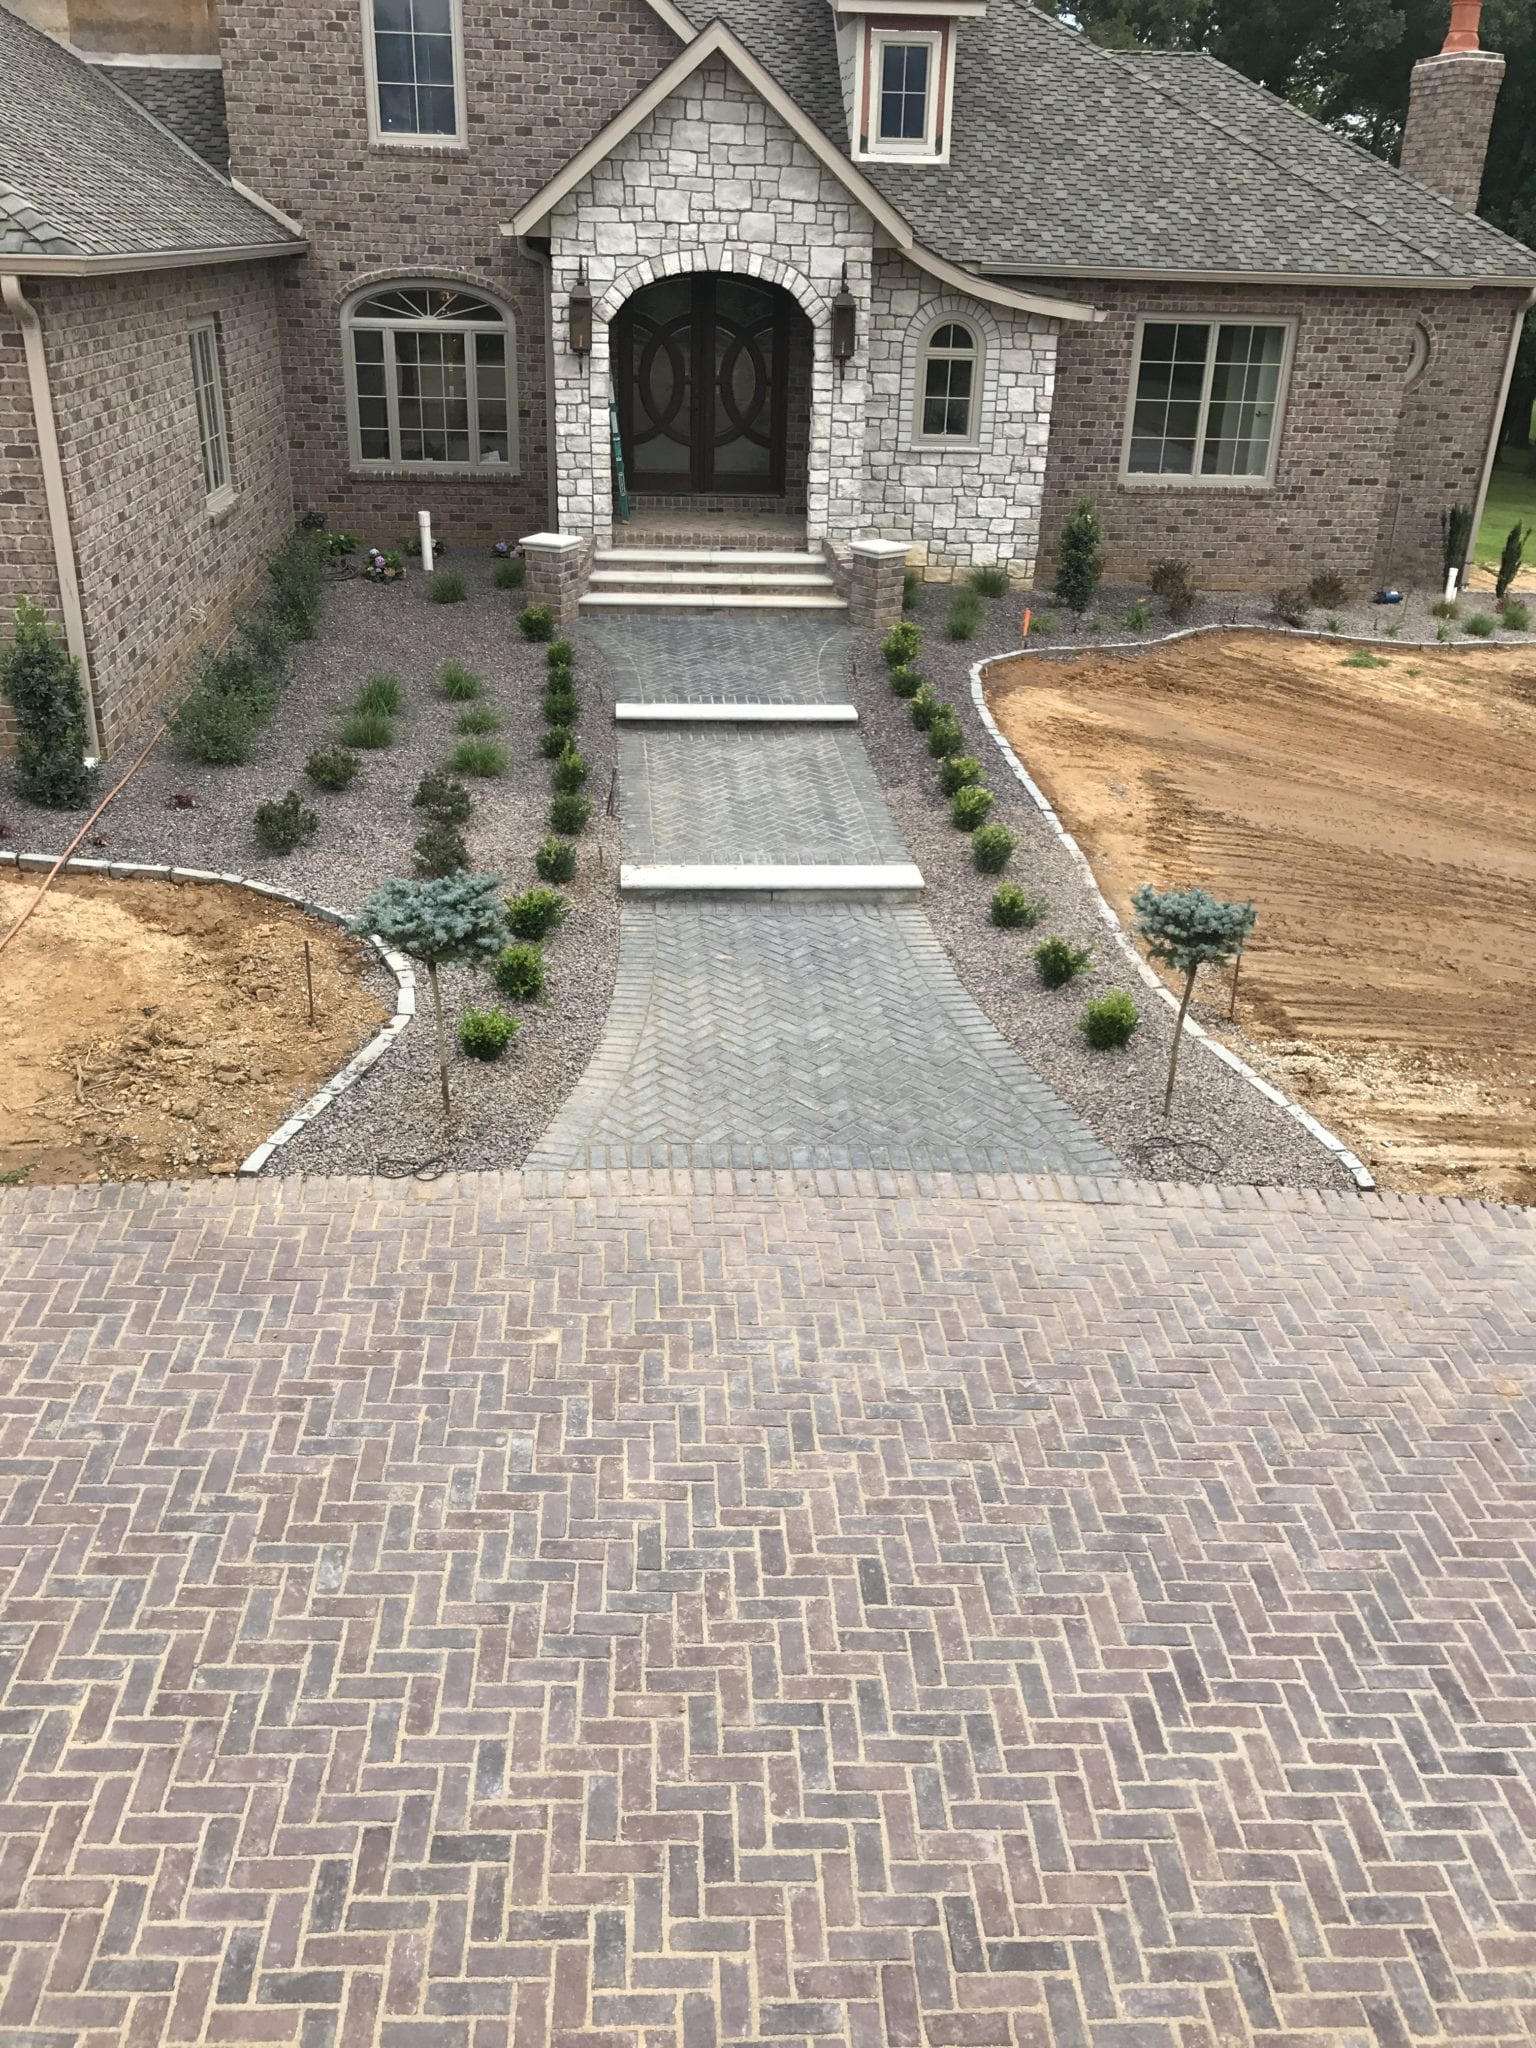 stone driveway and landscape features for a home in Poplar Bluff, MO